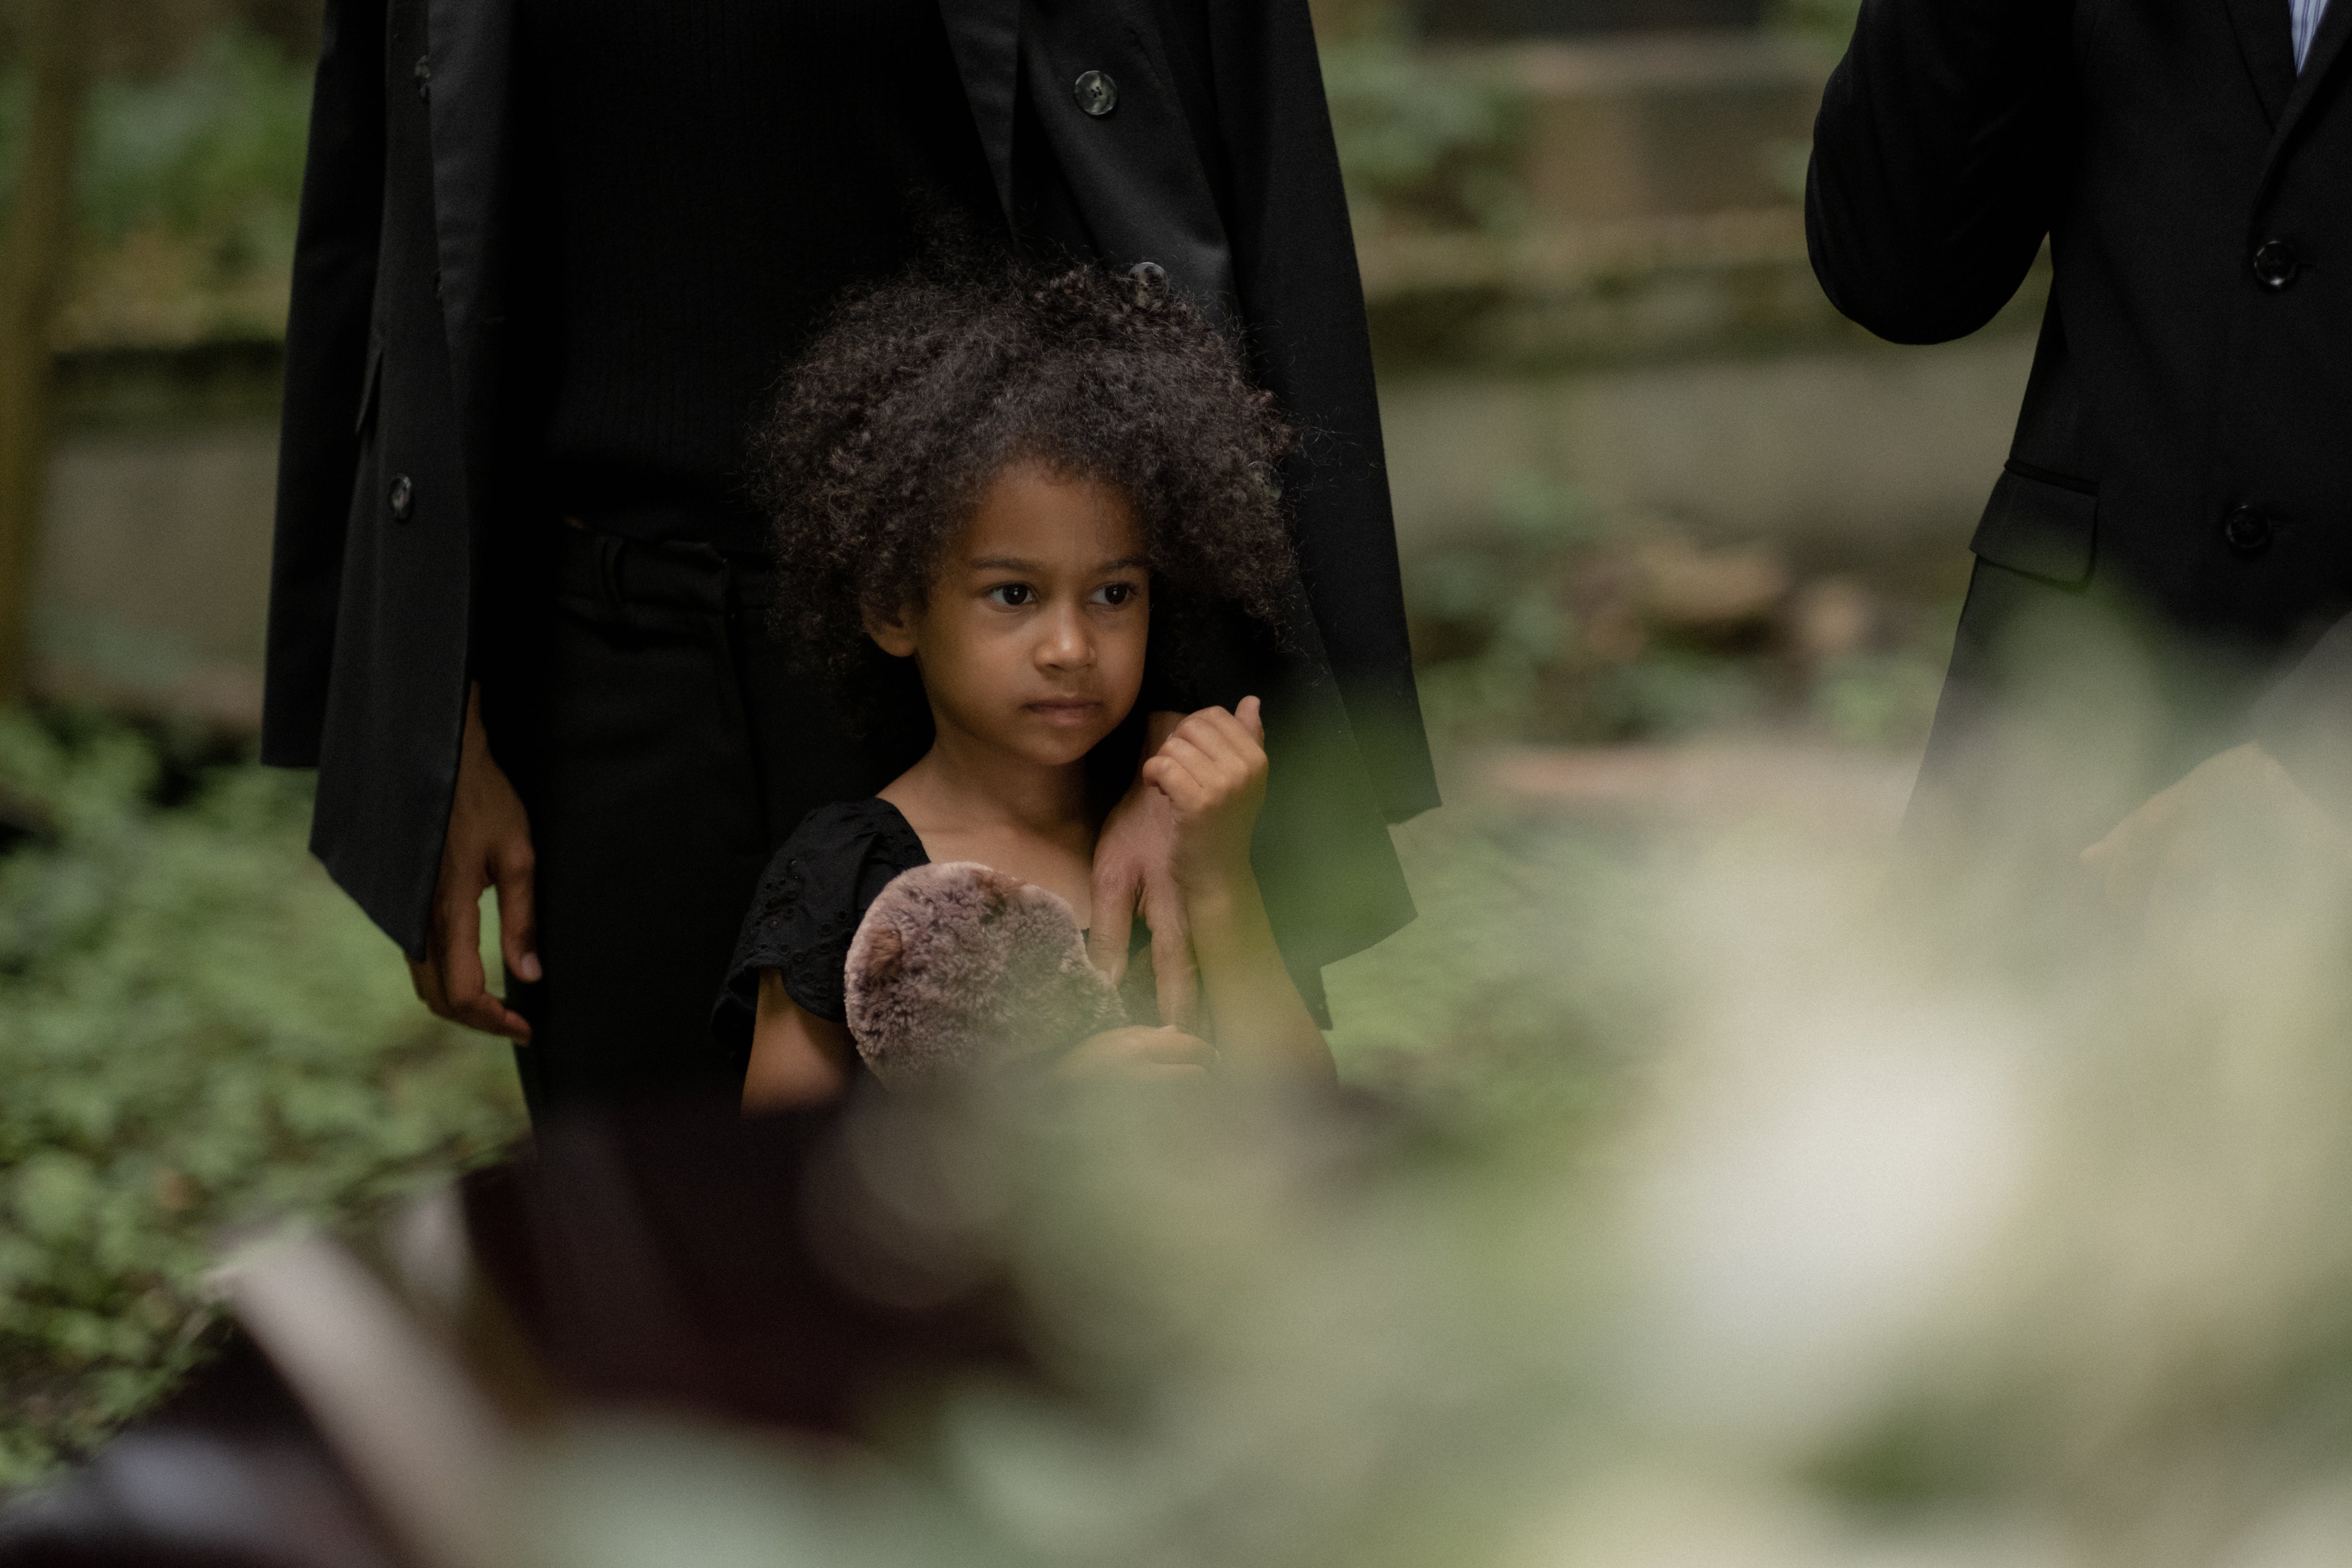 A child holding a stuffed toy at a funeral. | Source: Pexels